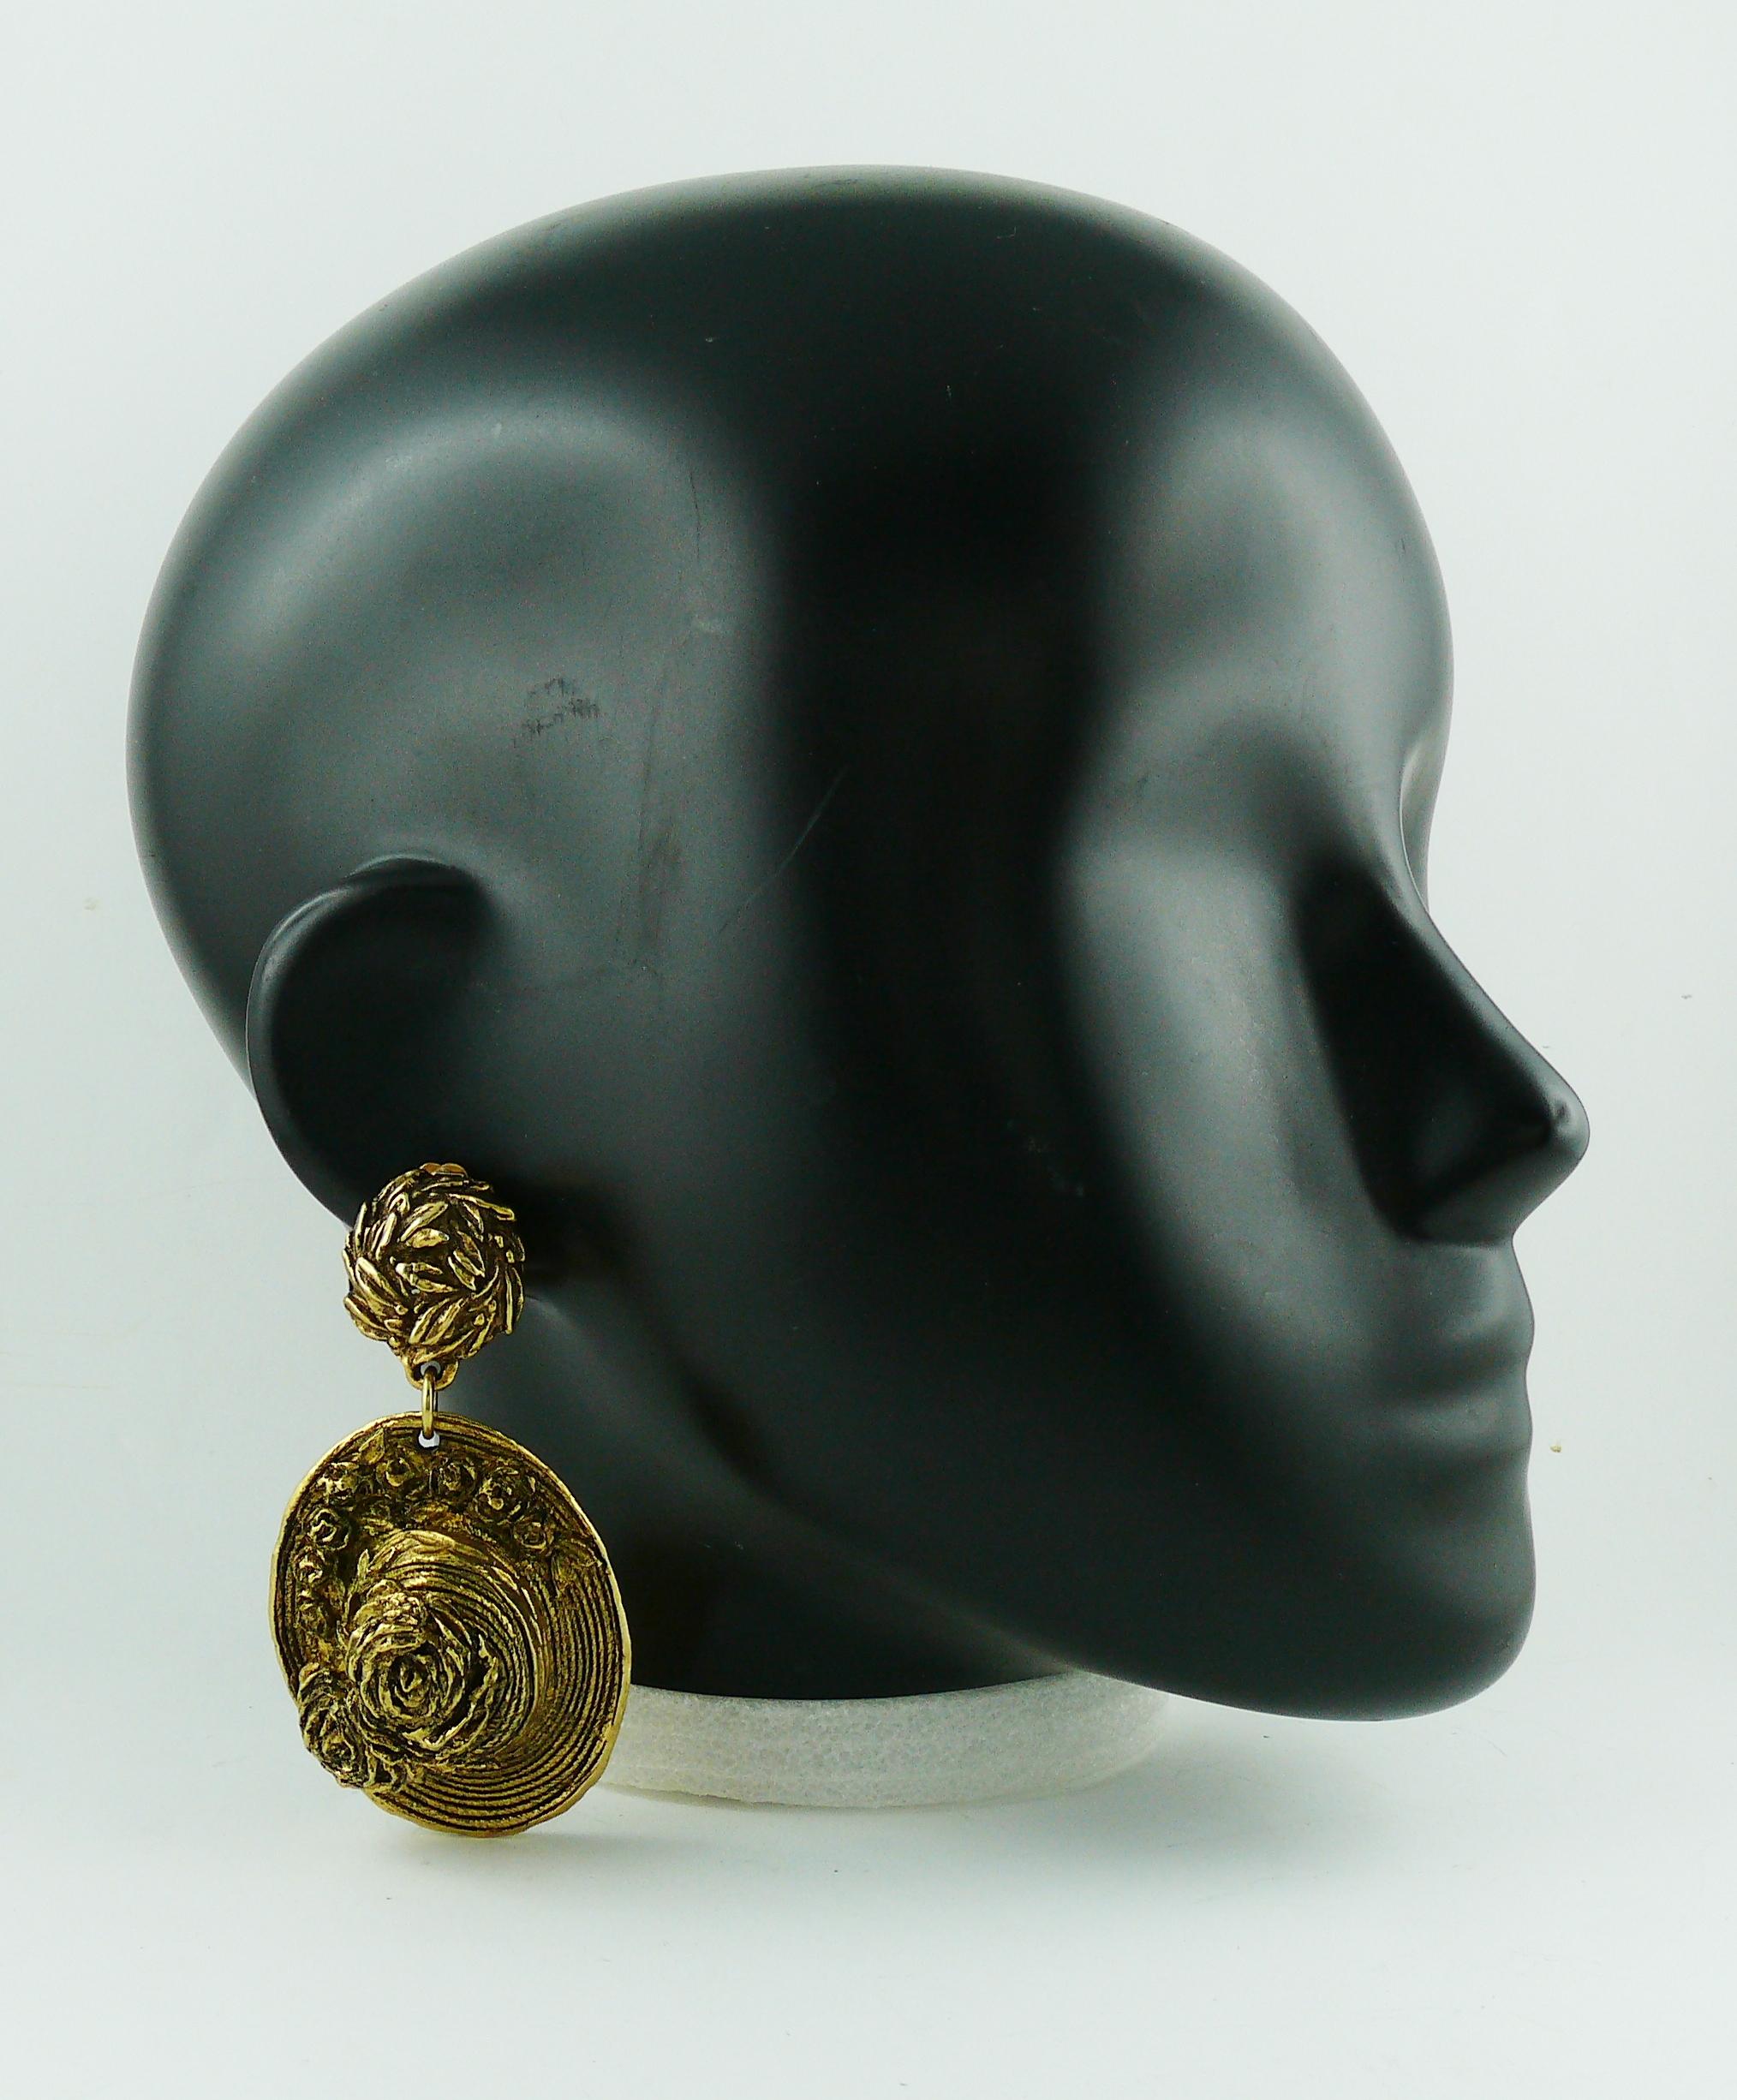 CHANTAL THOMASS vintage rare massive dangling earrings (clip-on) featuring hats with flowers in gold tone with antiqued patina.

Embossed CHANTAL THOMASS.

Indicative measurements : height approx. 8 cm (3.15 inches) / max. width 4 cm (1.57